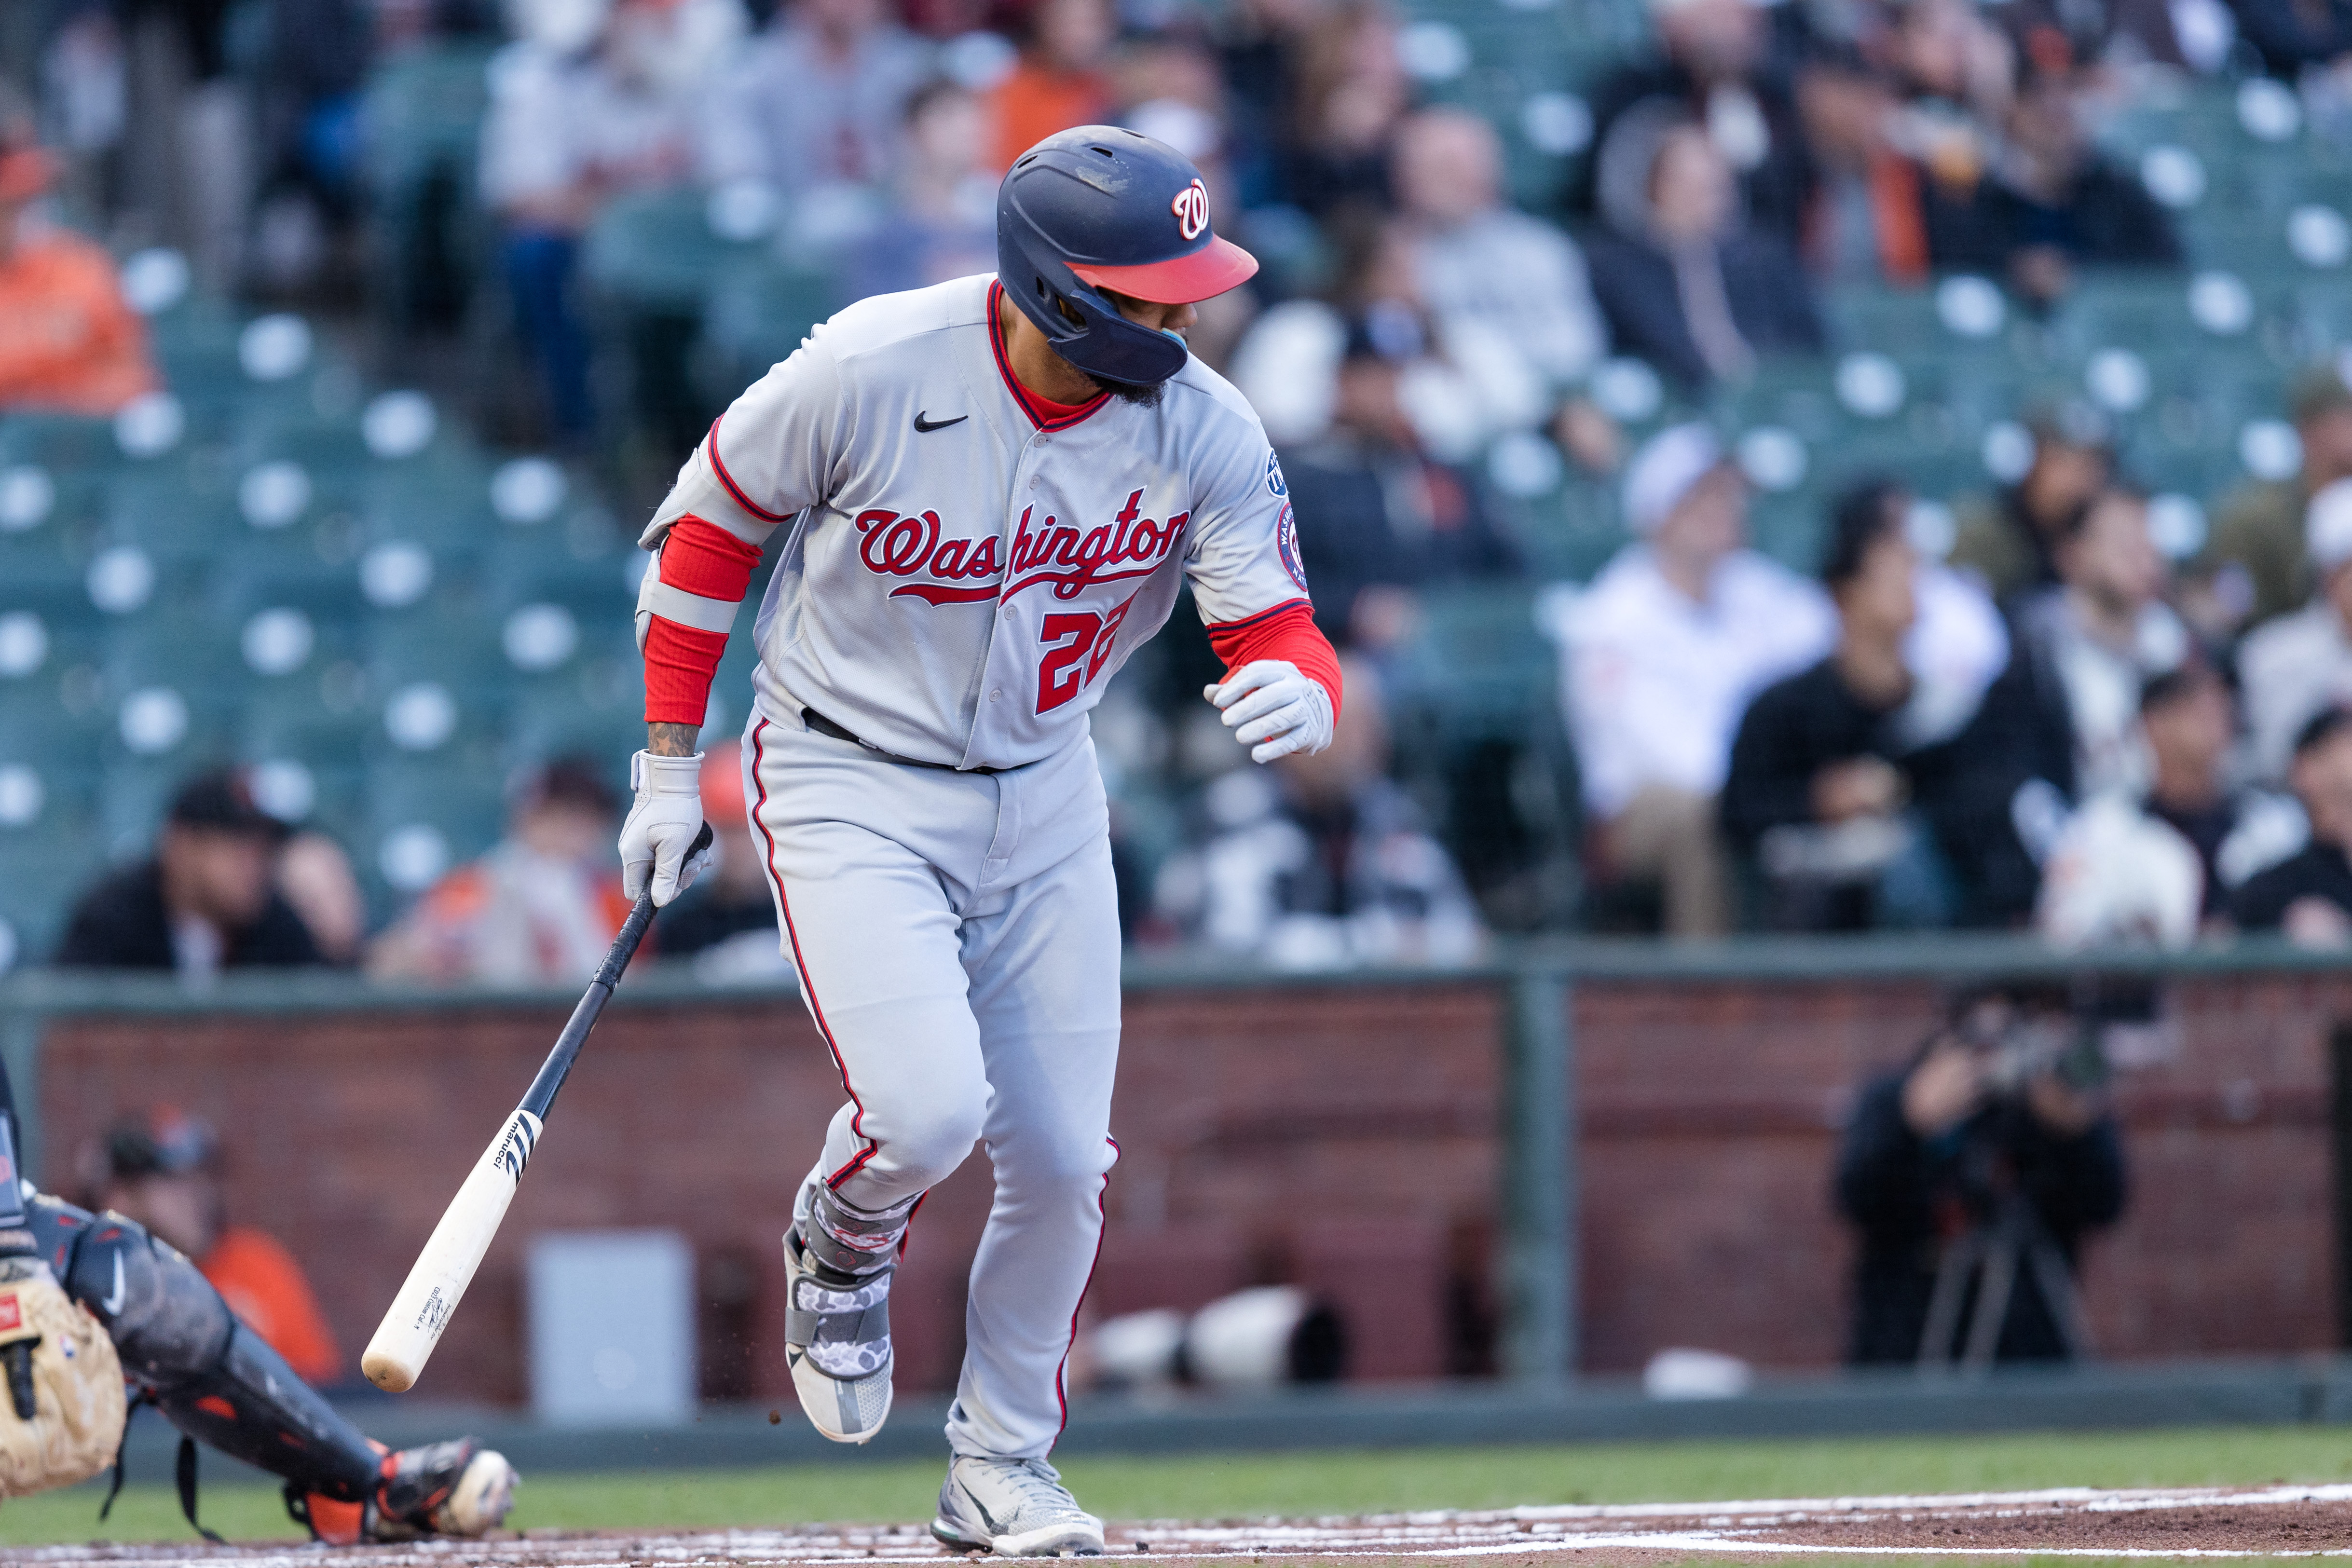 Washington Nationals: It's Time to Move on From Dominic Smith